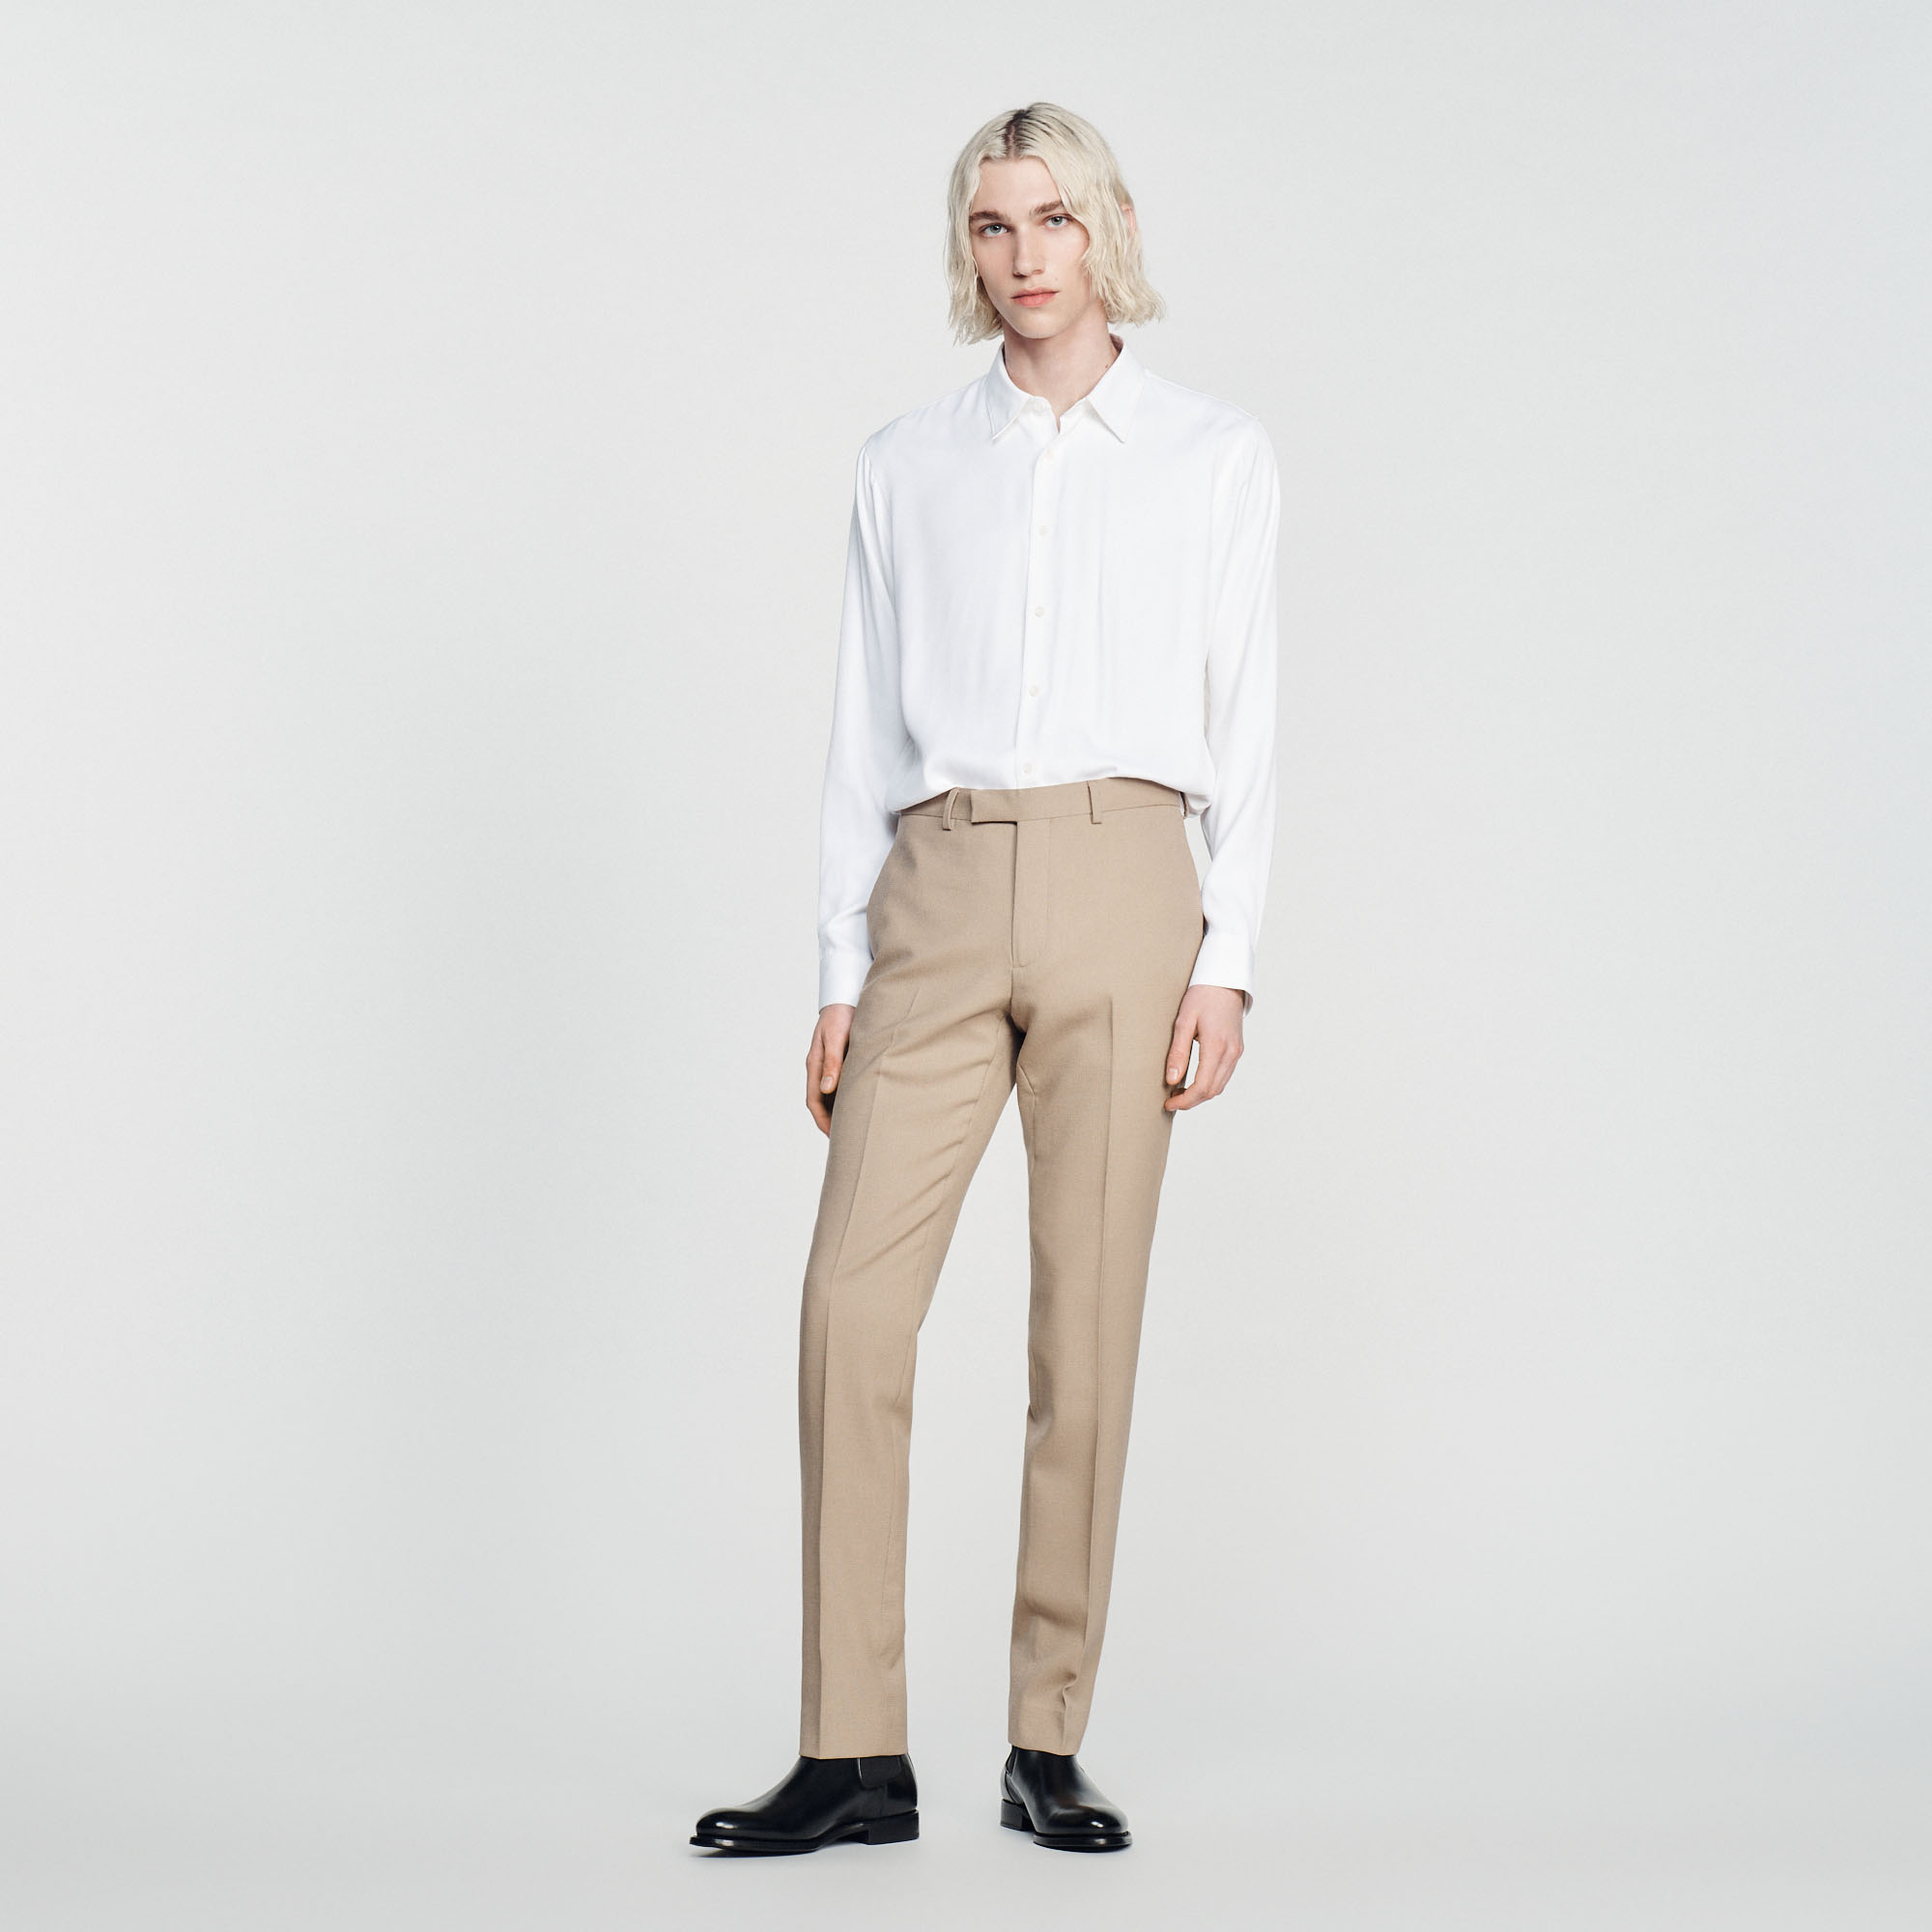 Sandro wool Wool suit trousers with a classic cut and pockets on the sides and back